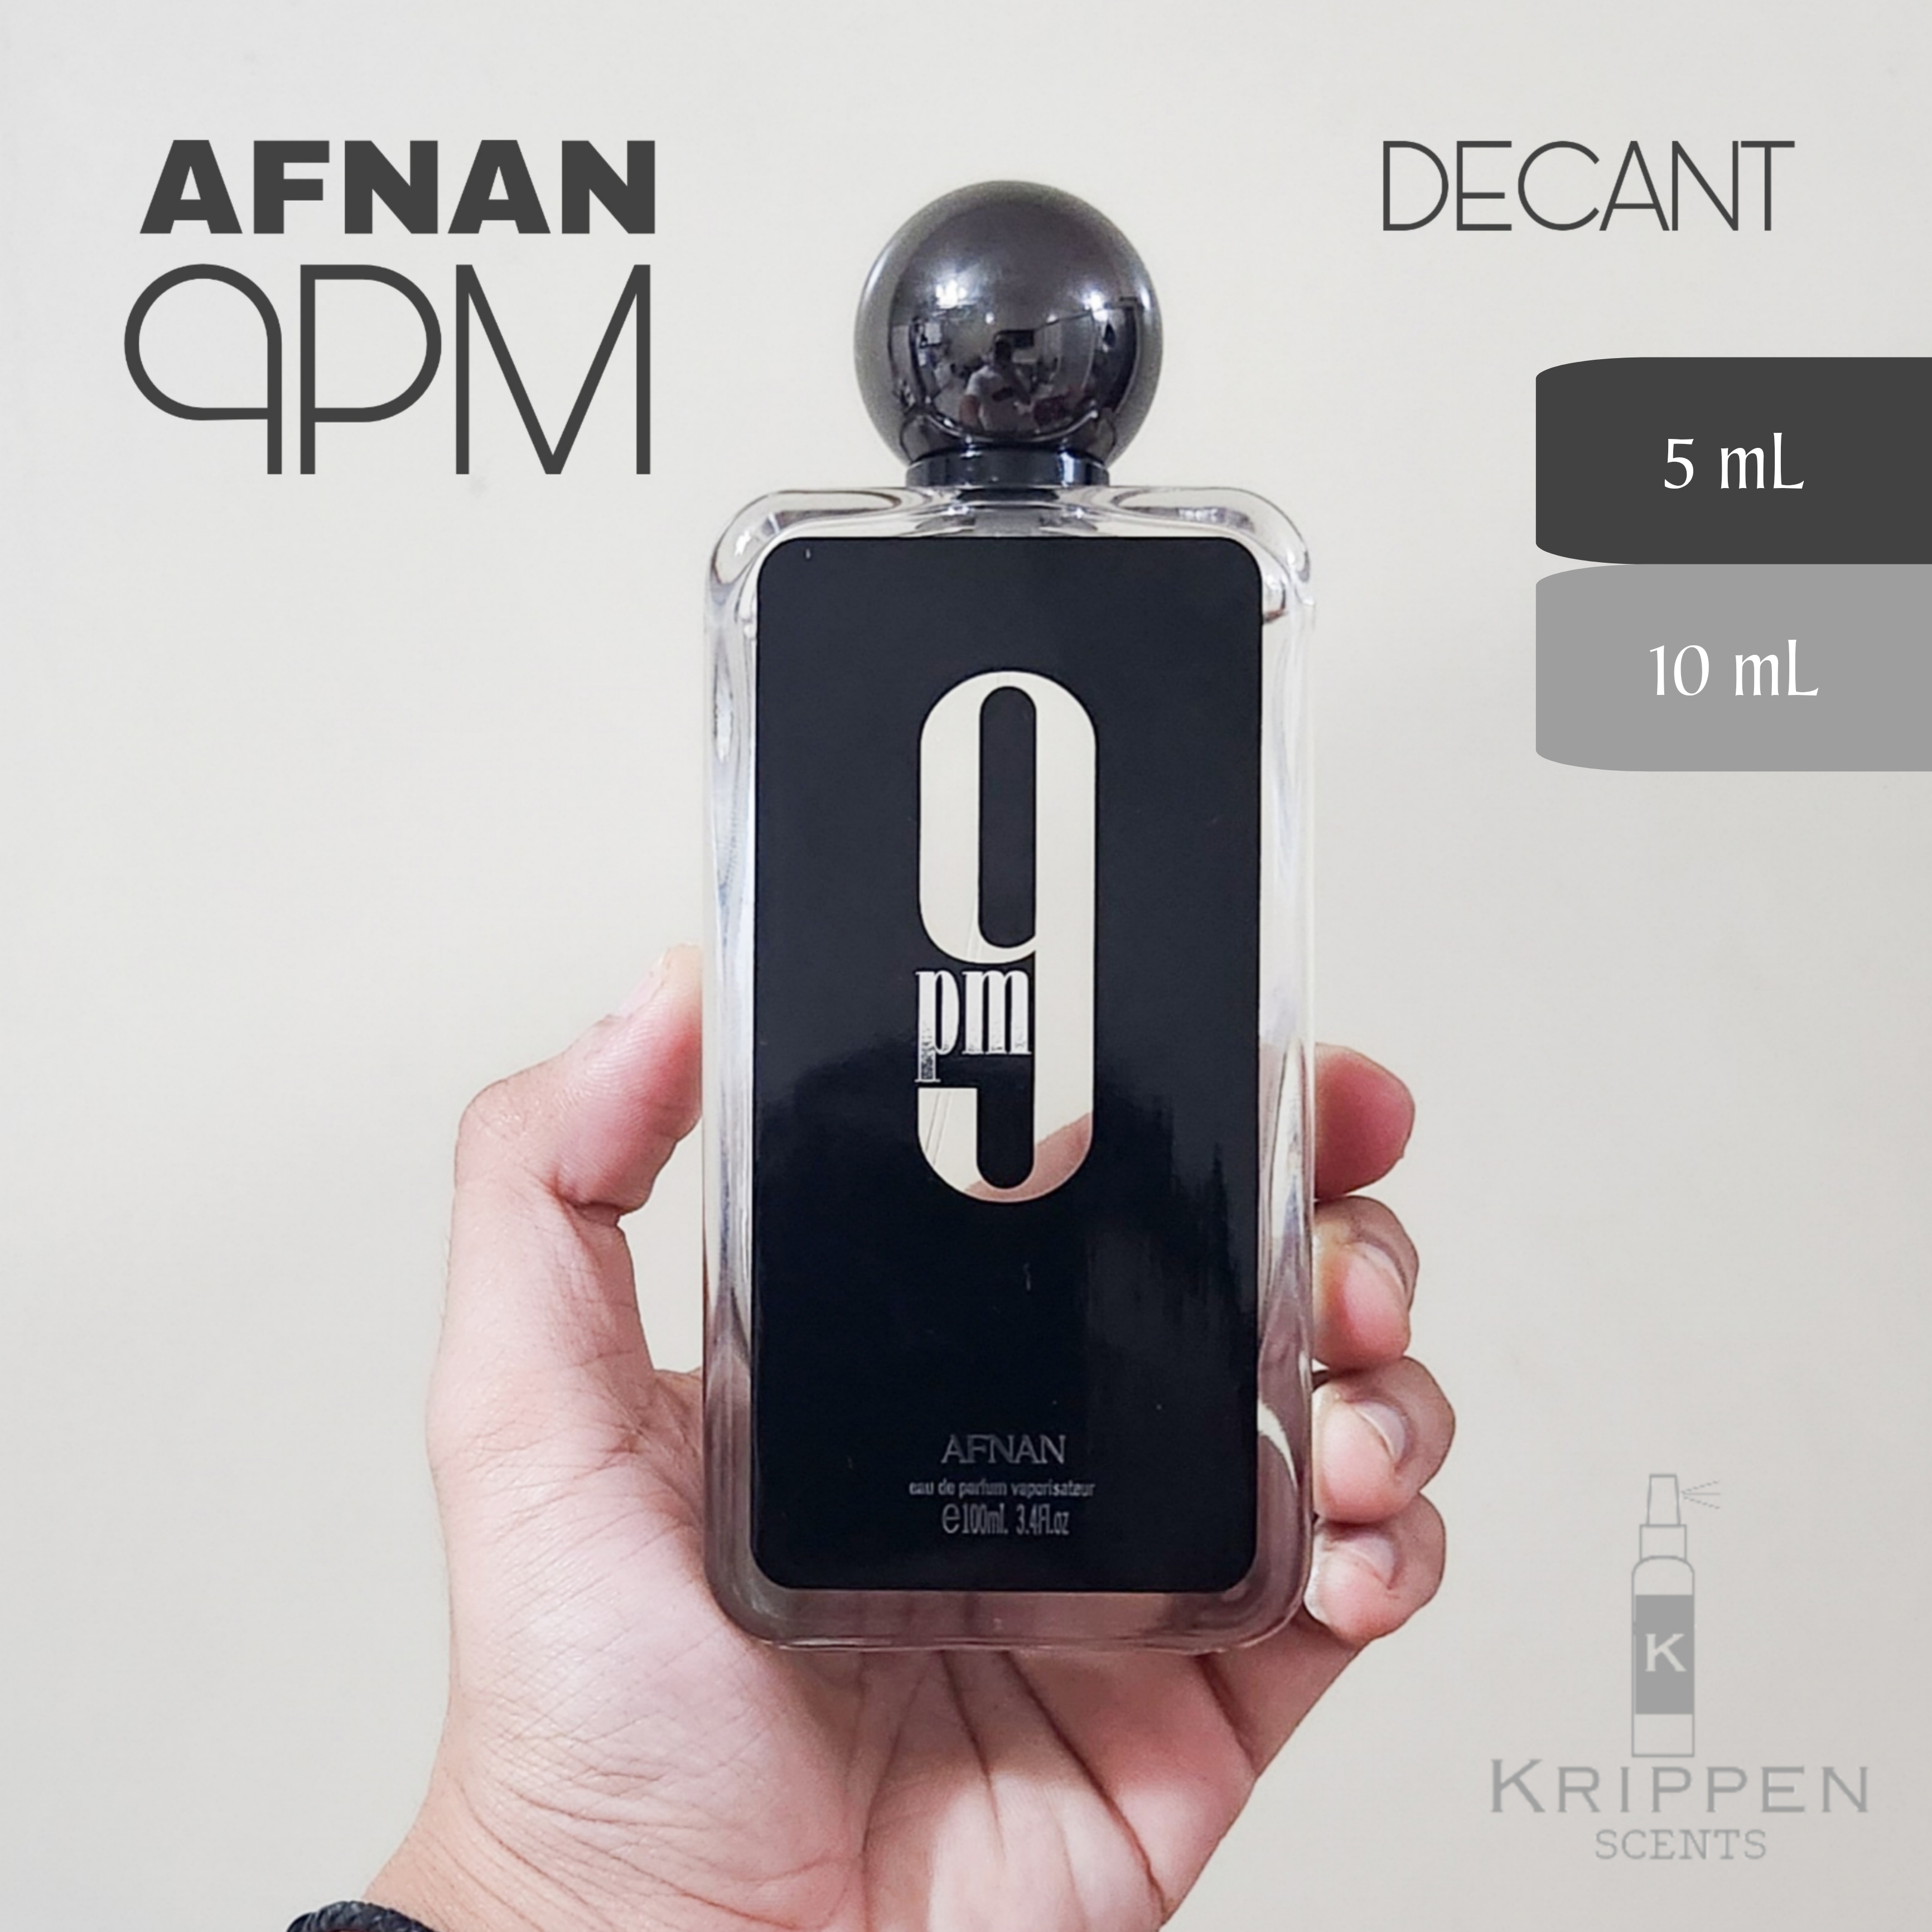 Afnan 9PM Fragrance Review (Ultra Male Clone) 